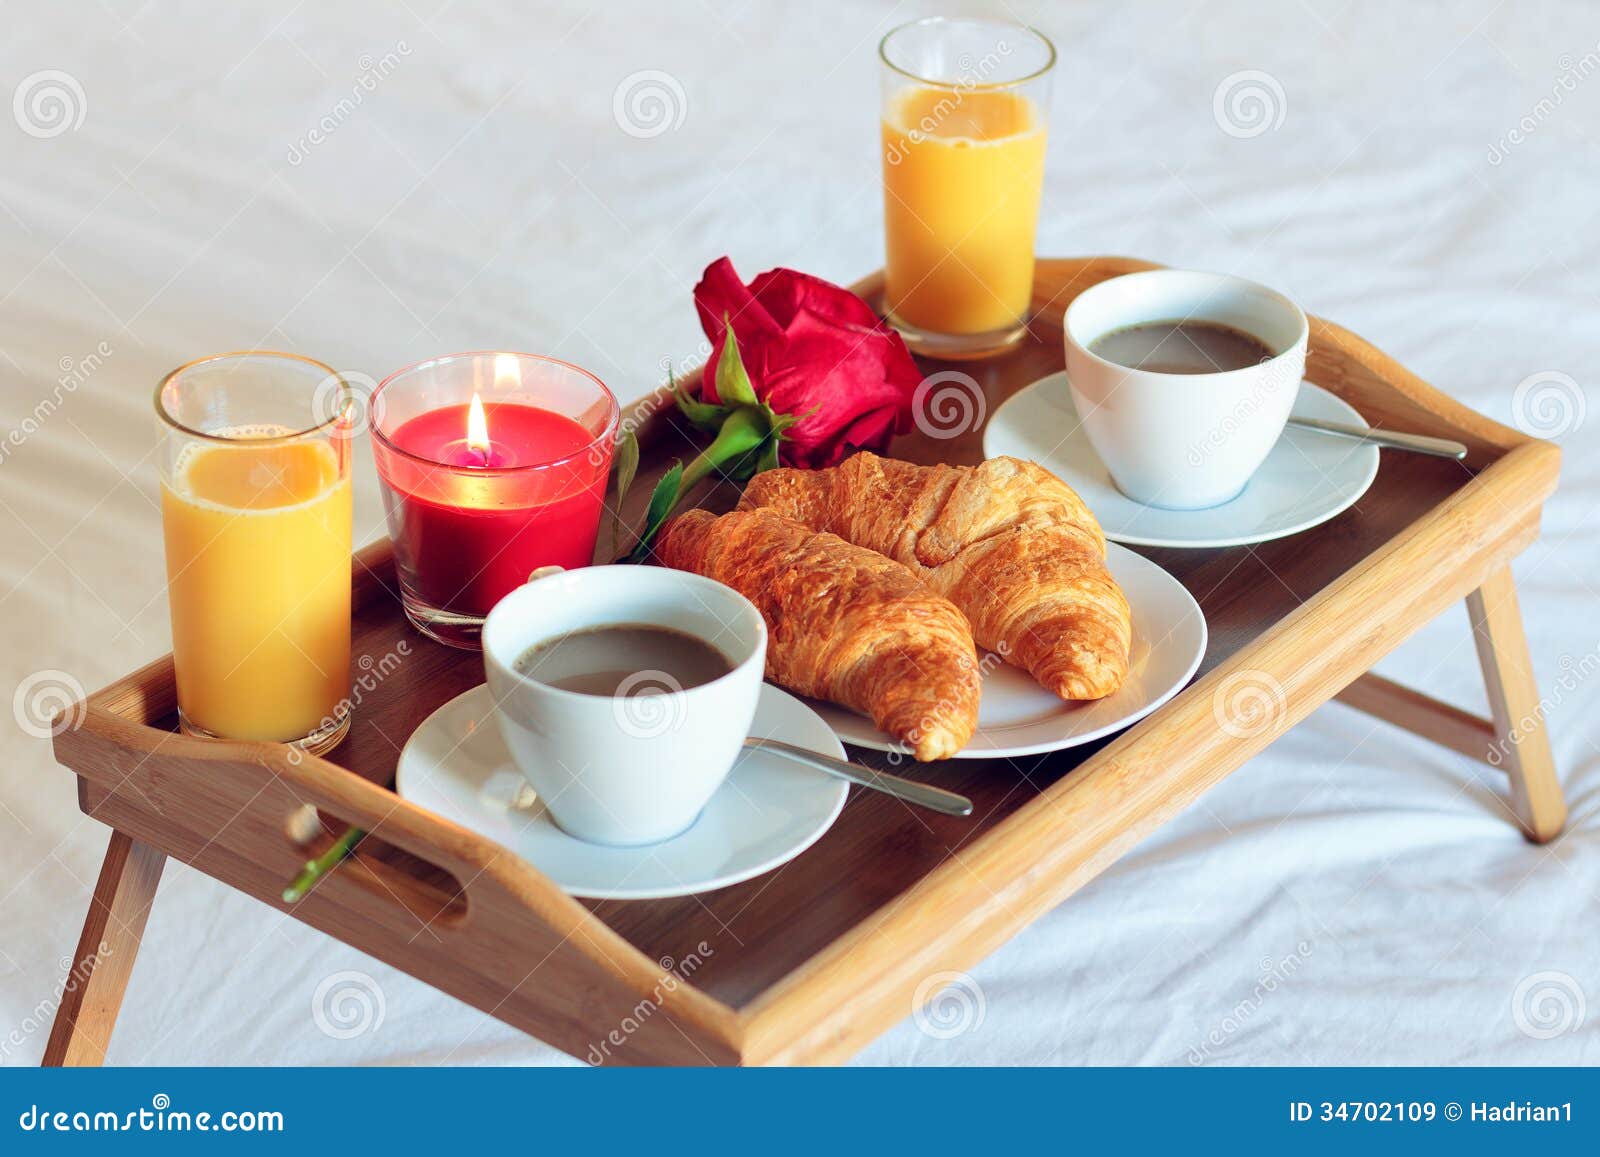 themes room tumblr Images Stock Breakfast Free For Couple Royalty Time